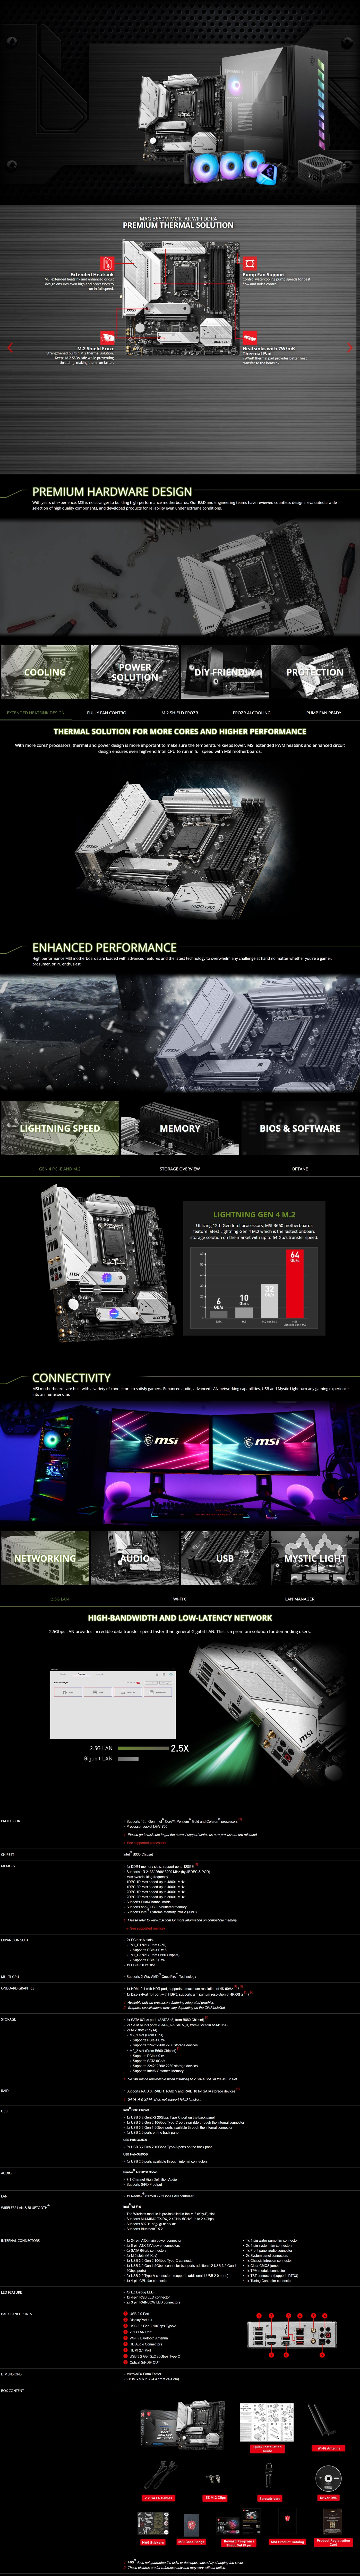 A large marketing image providing additional information about the product MSI MAG B660M Mortar WIFI DDR4 LGA1700 mATX Desktop Motherboard - Additional alt info not provided